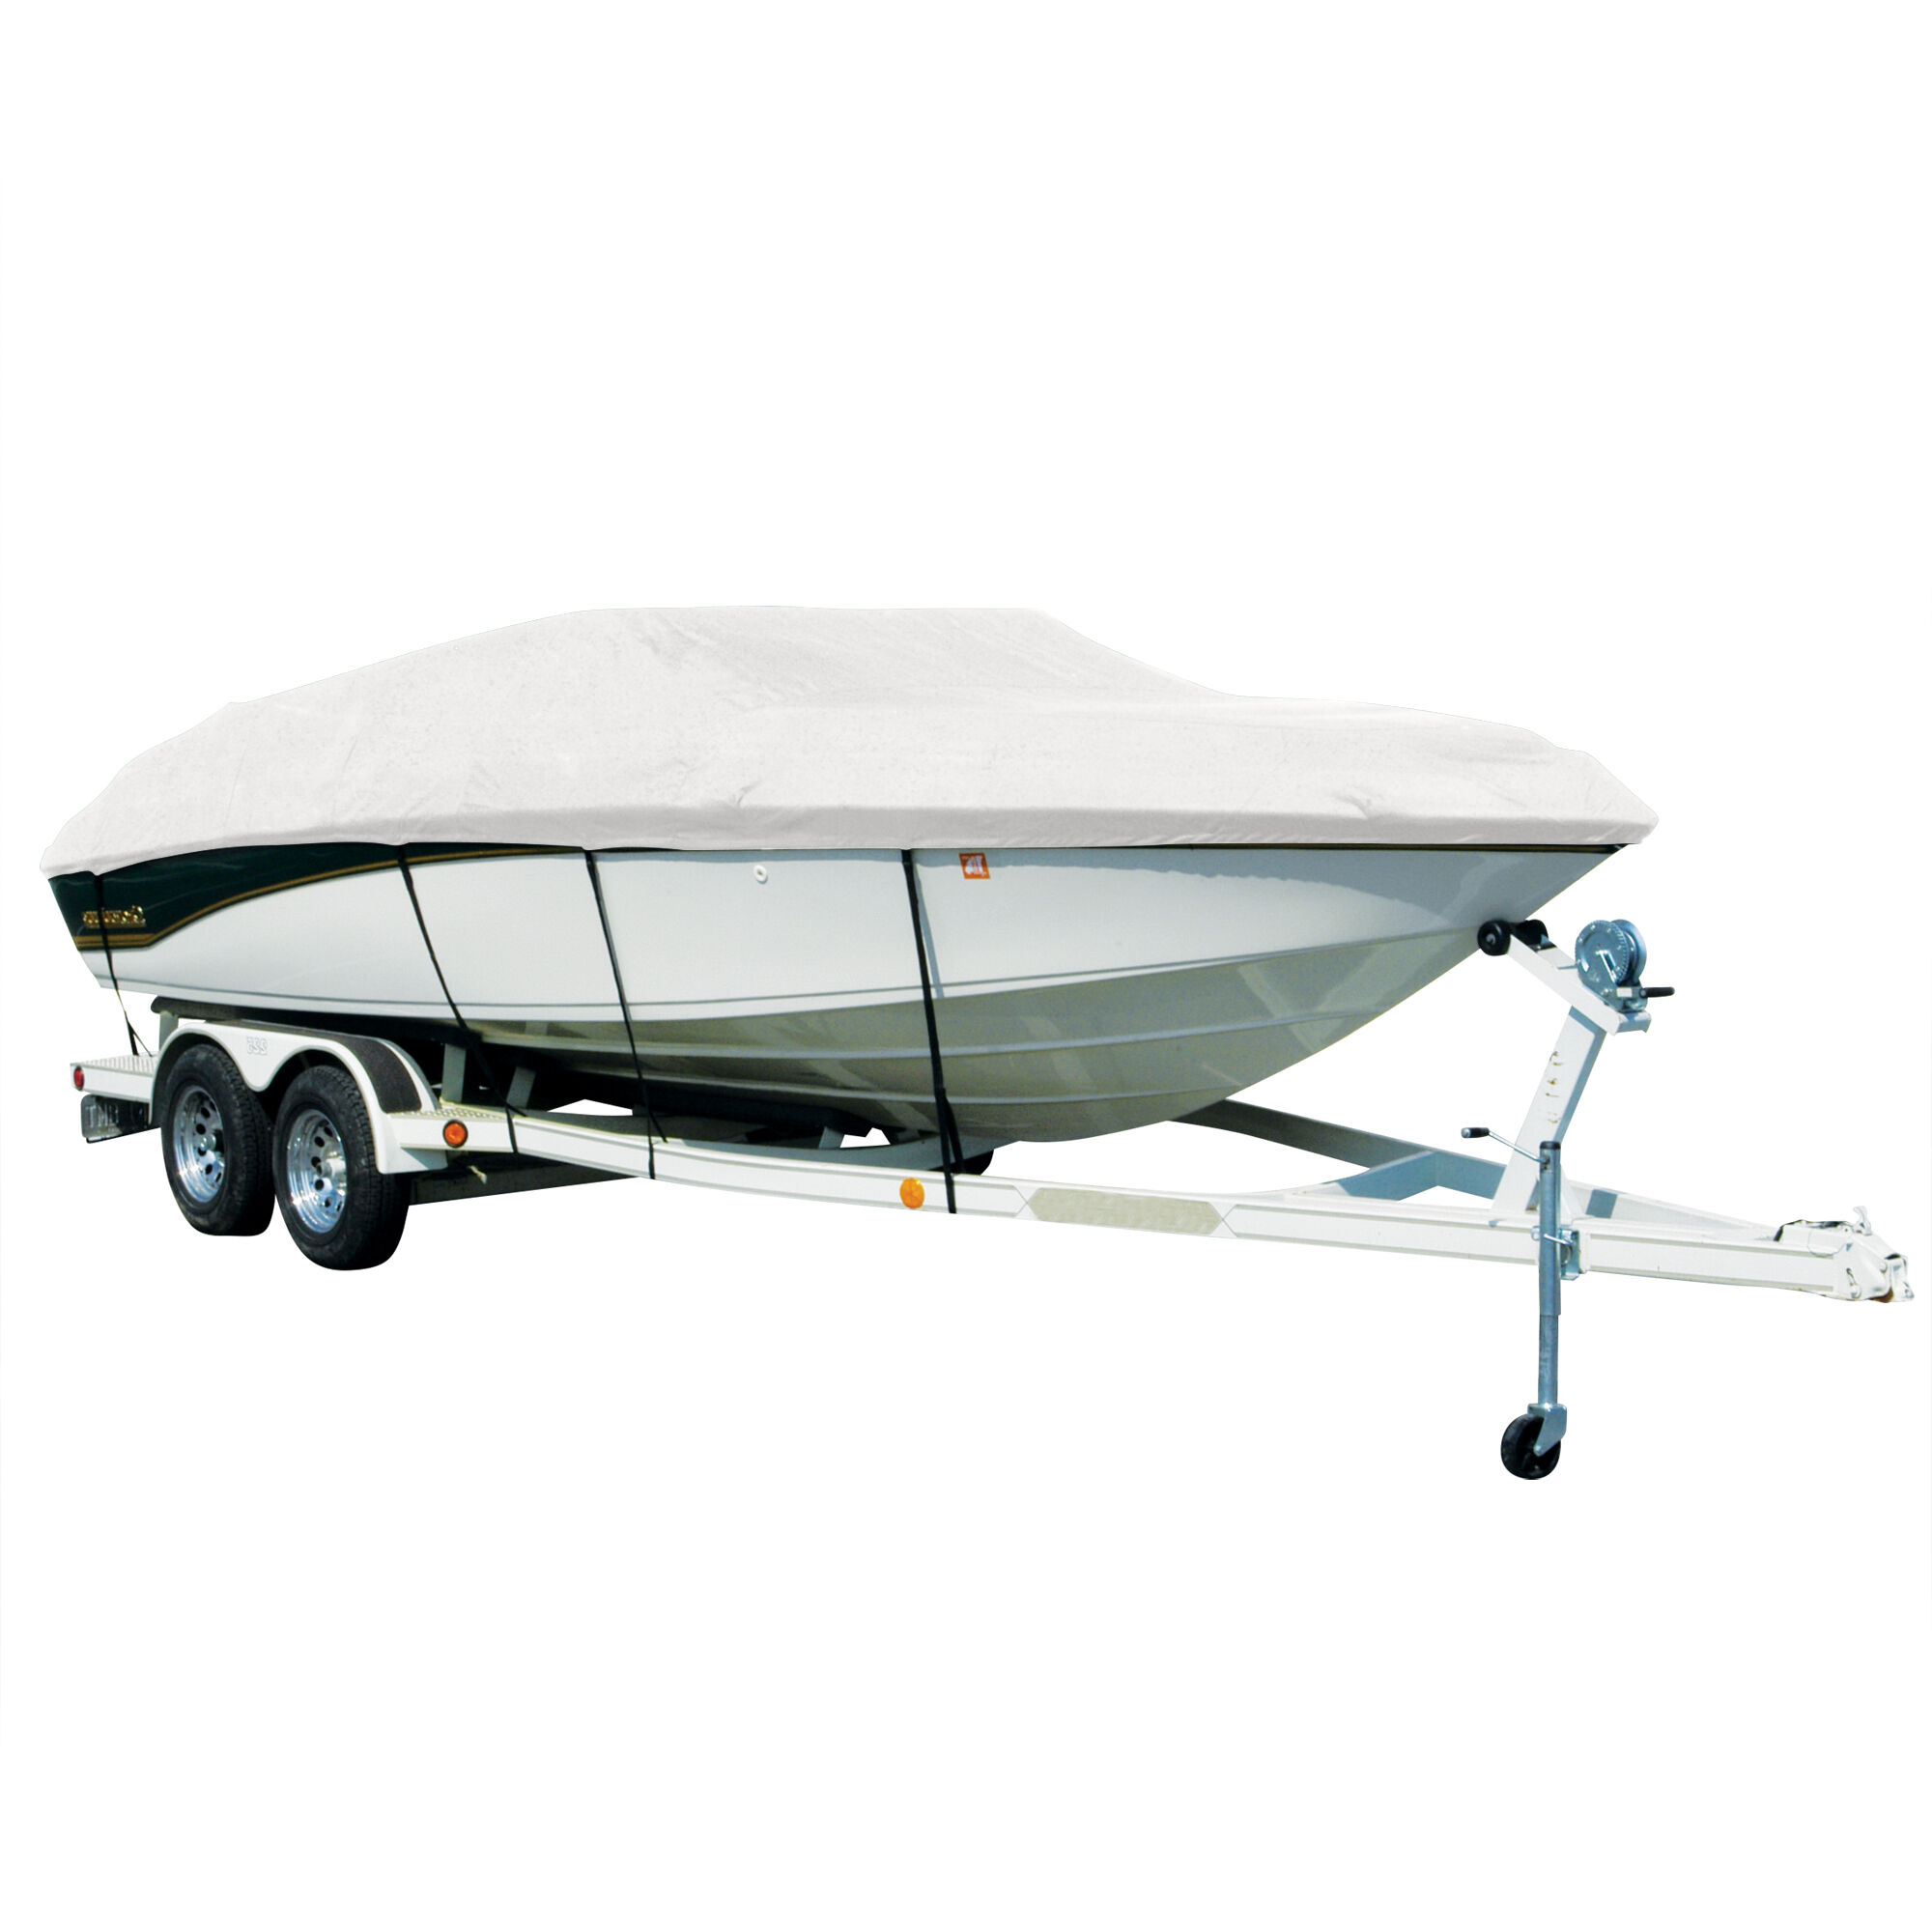 Covermate CHRIS CRAFT LAUNCH 22 I/O Boat Cover in White